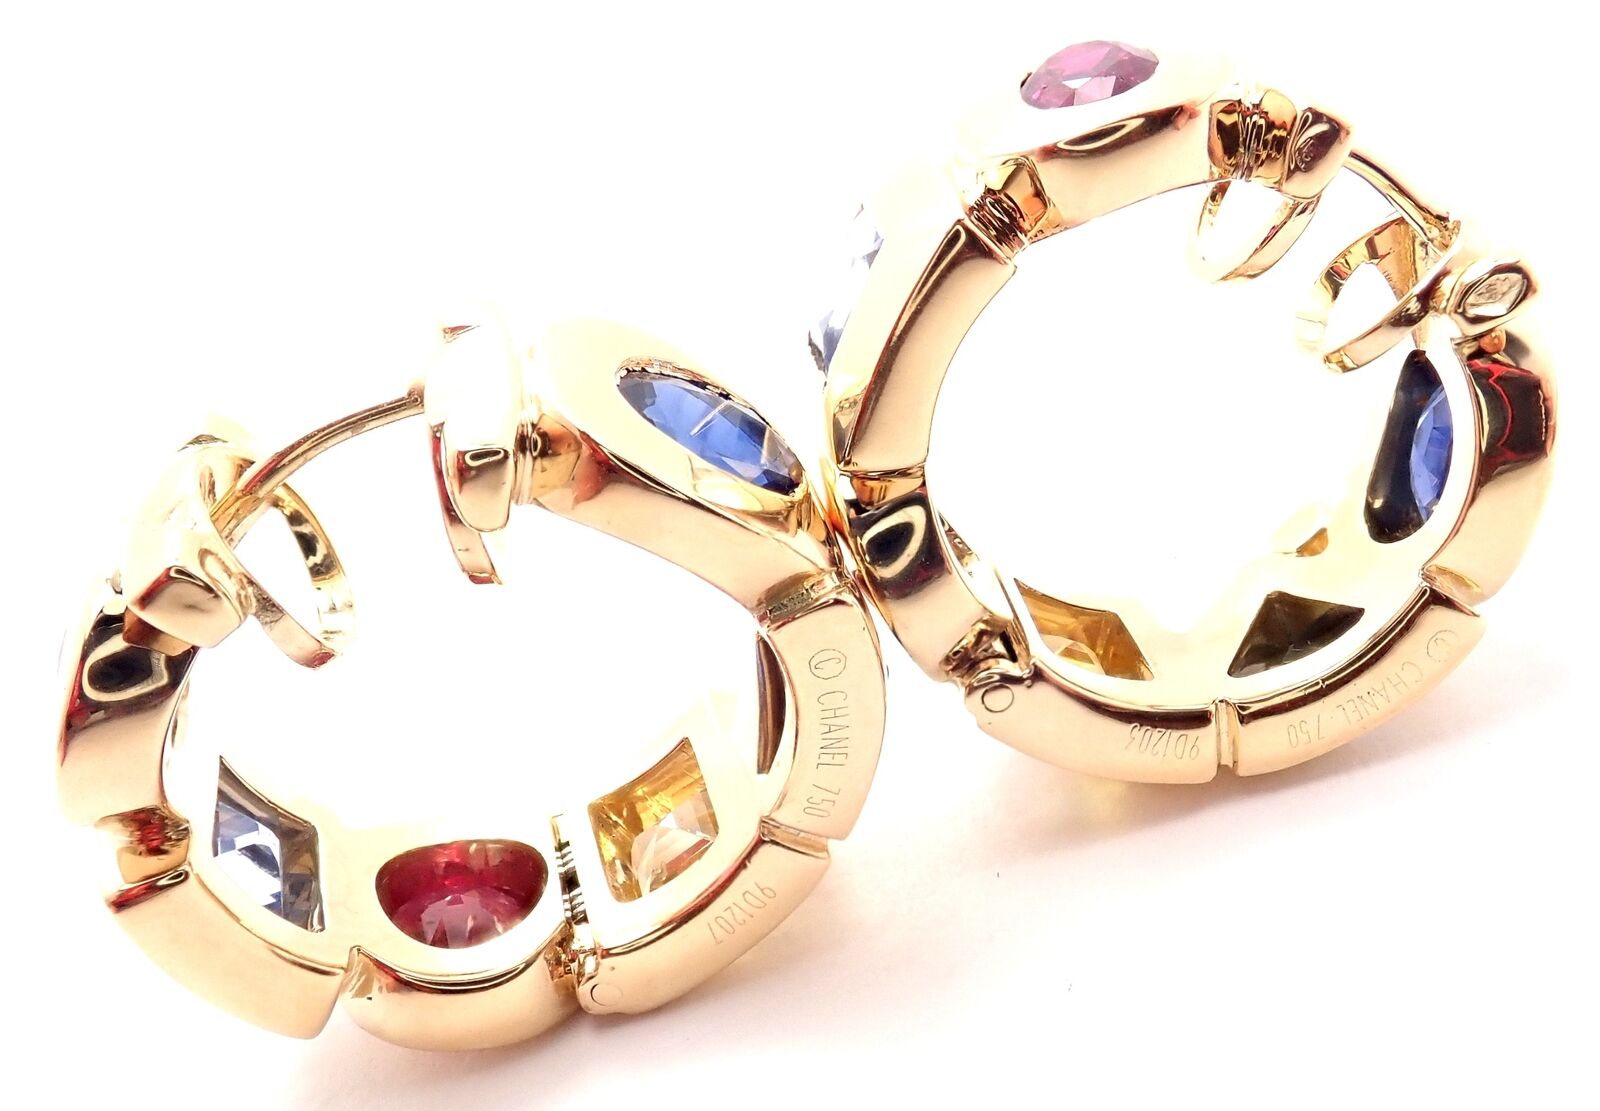 Authentic! Chanel 18K Yellow Gold Sapphire Ruby Hoop Earrings